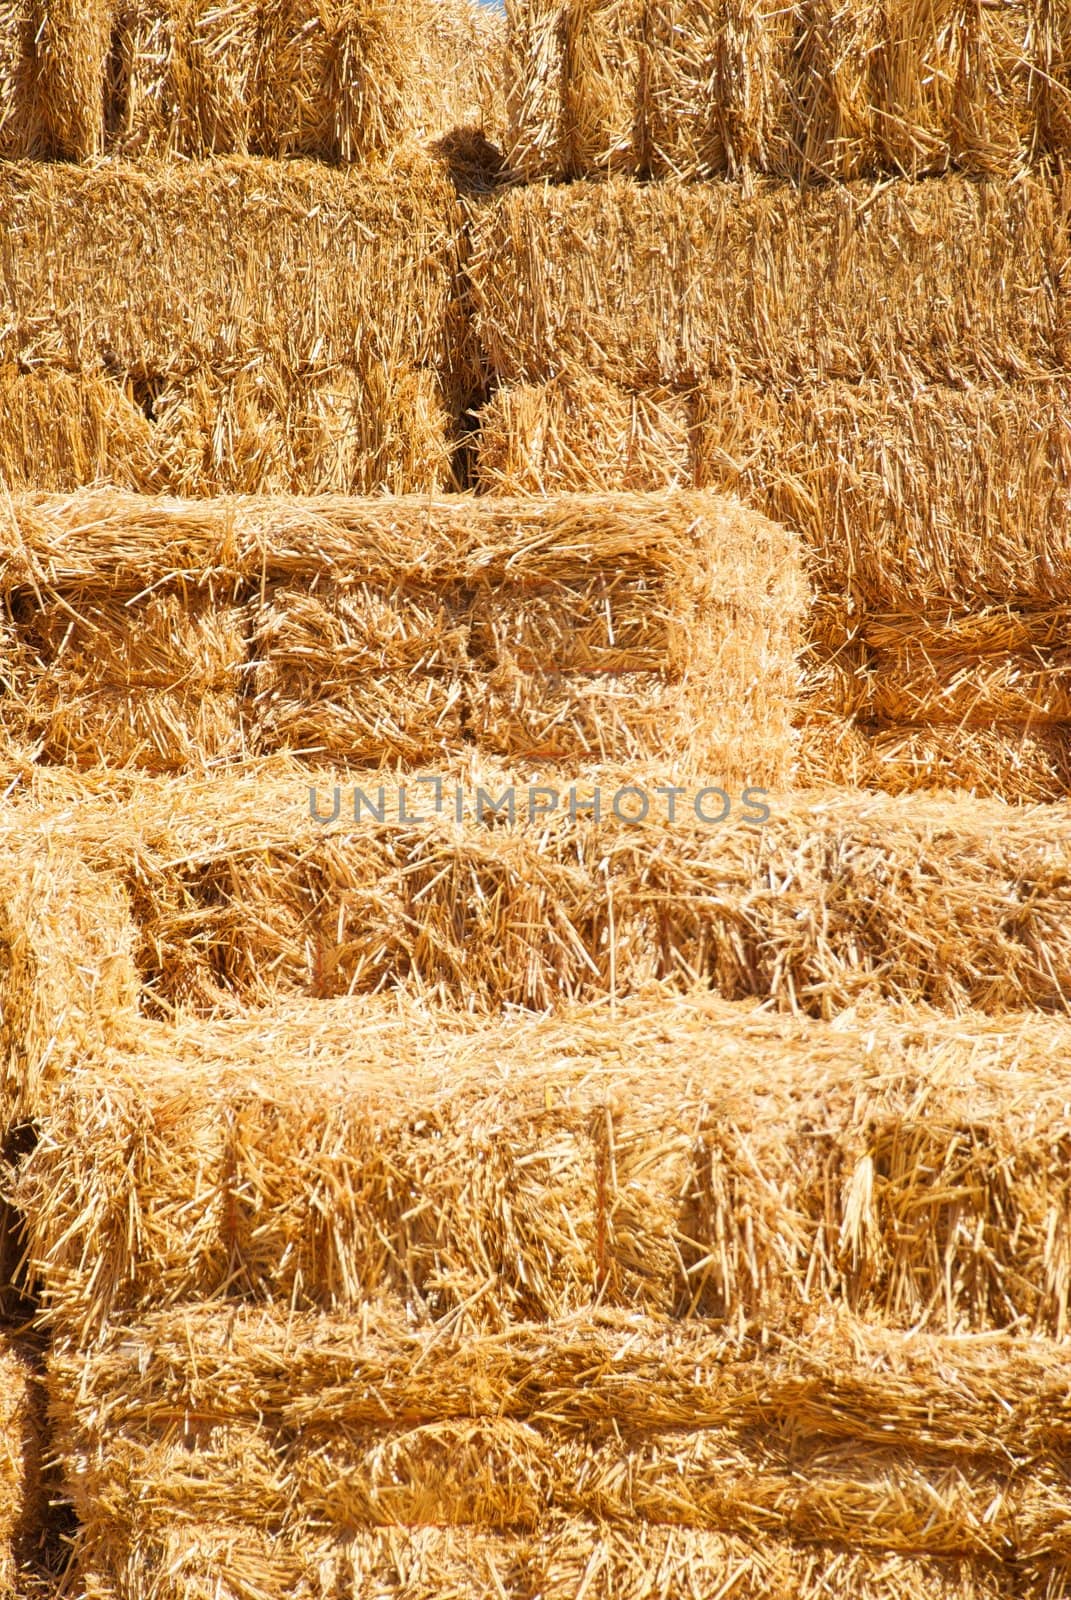 Vertical Stack of Hay Bailes by pixelsnap